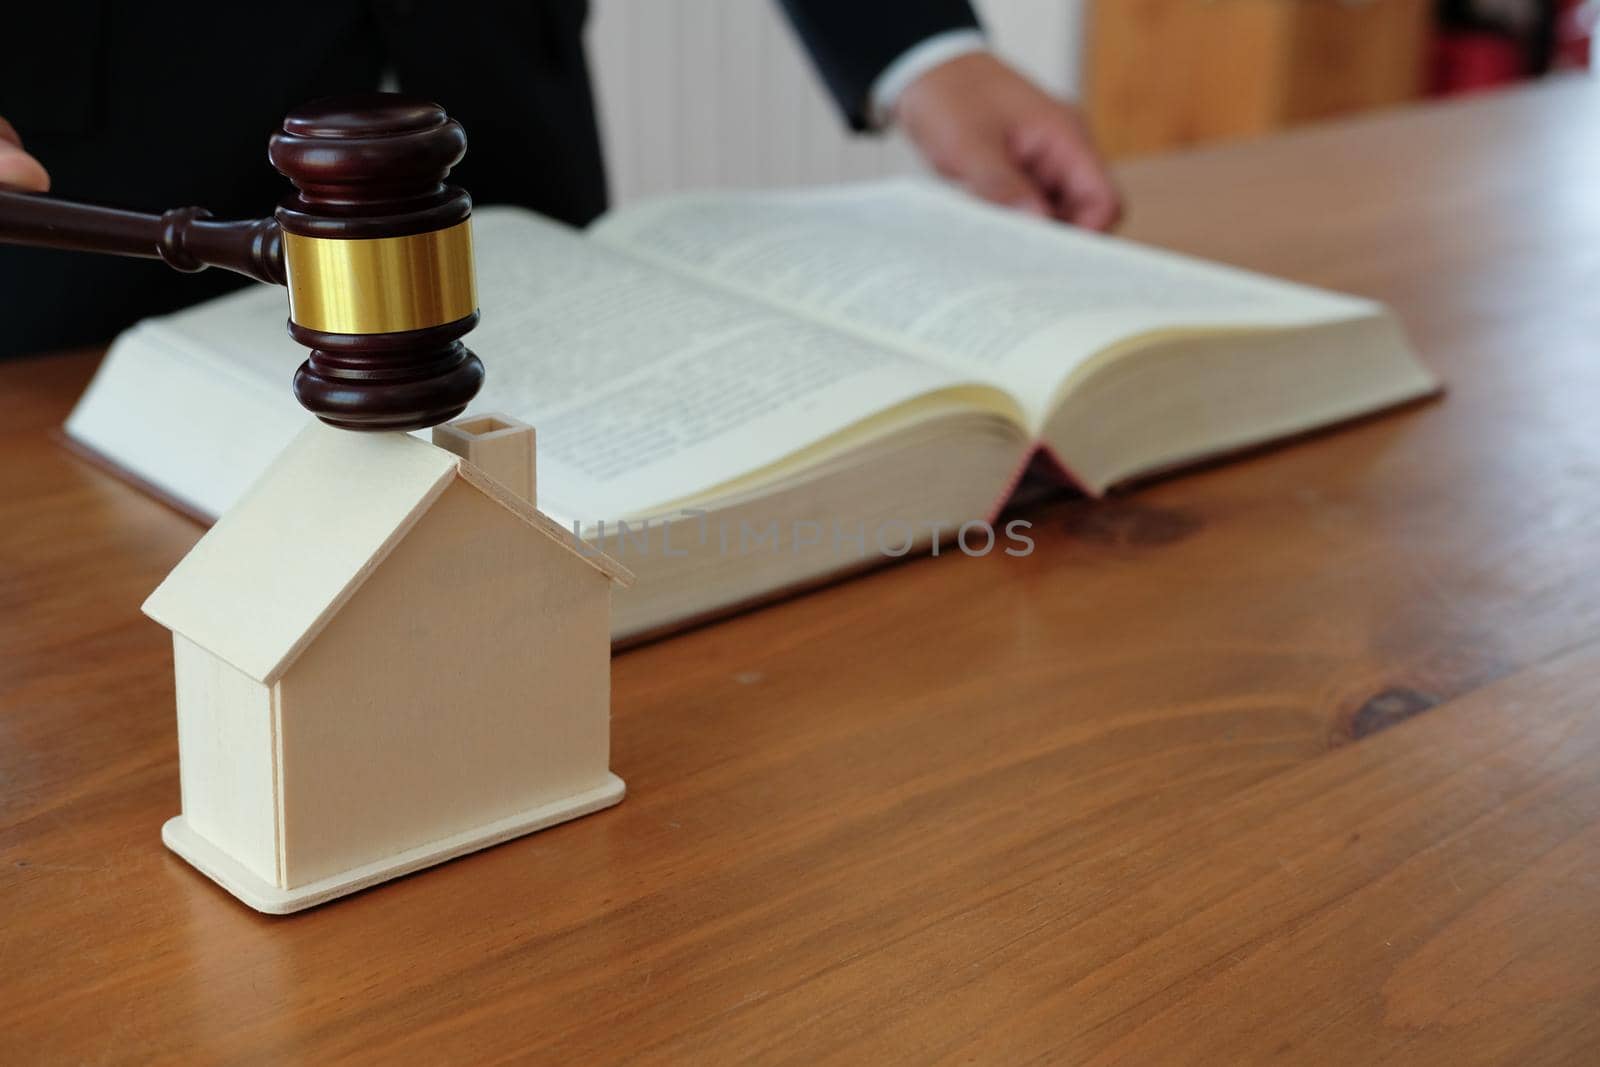 lawyer with judge gavel knocking house model with law book at courtroom. real estate dispute & property auction concept